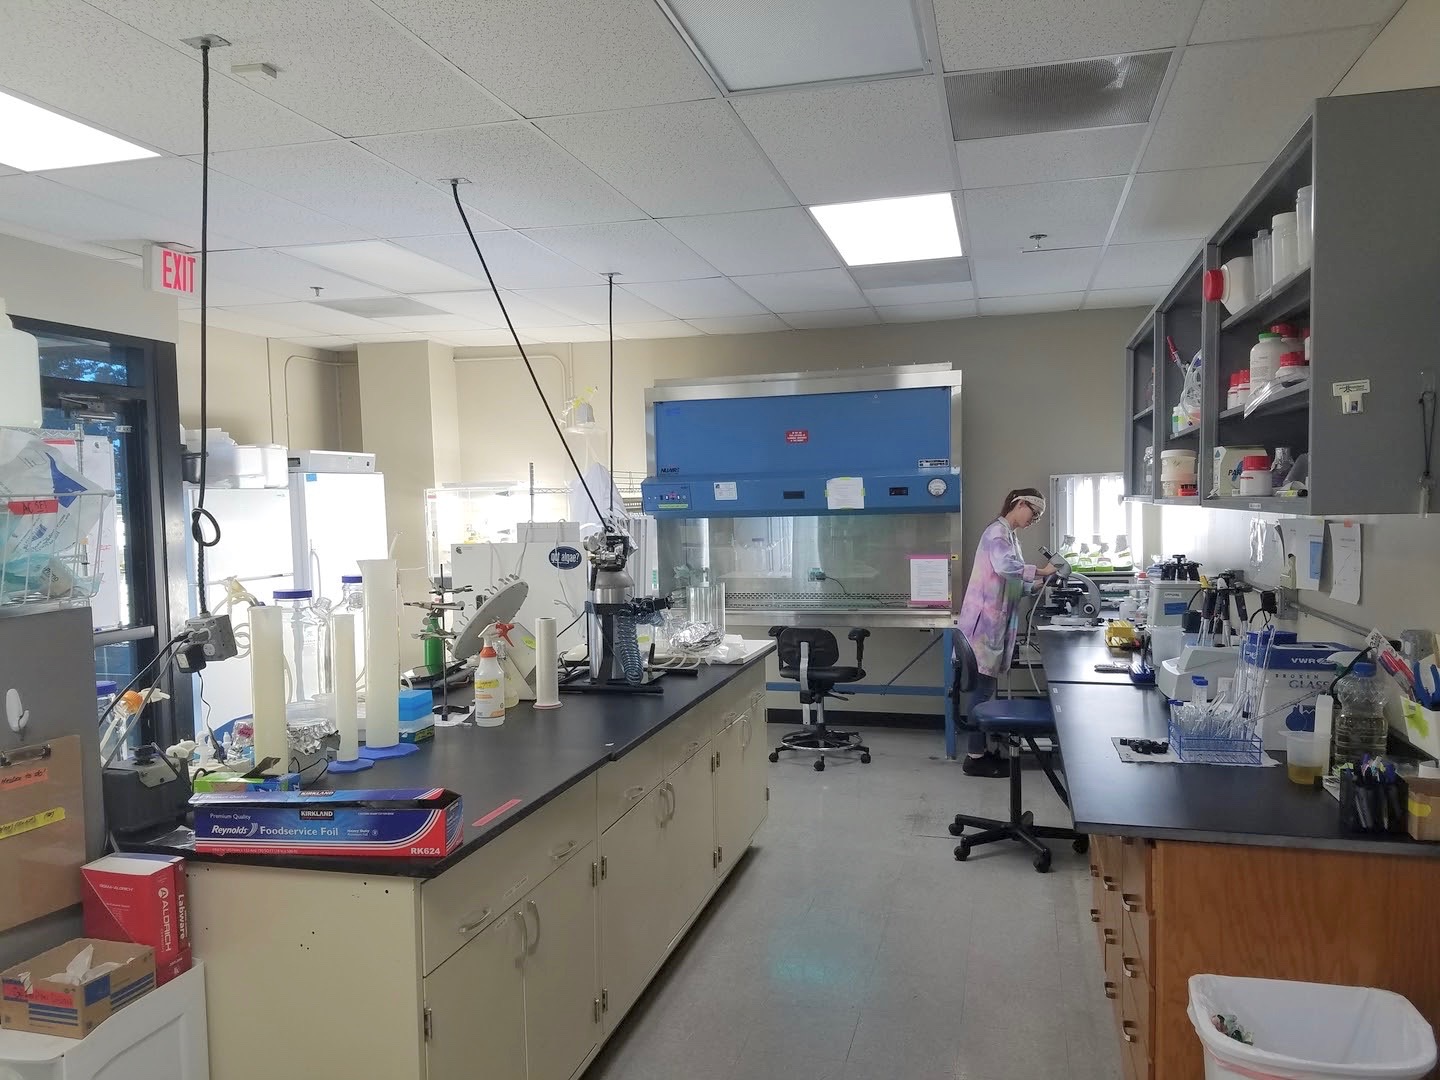 North County Biotech offers short-term and longer-term lab space.